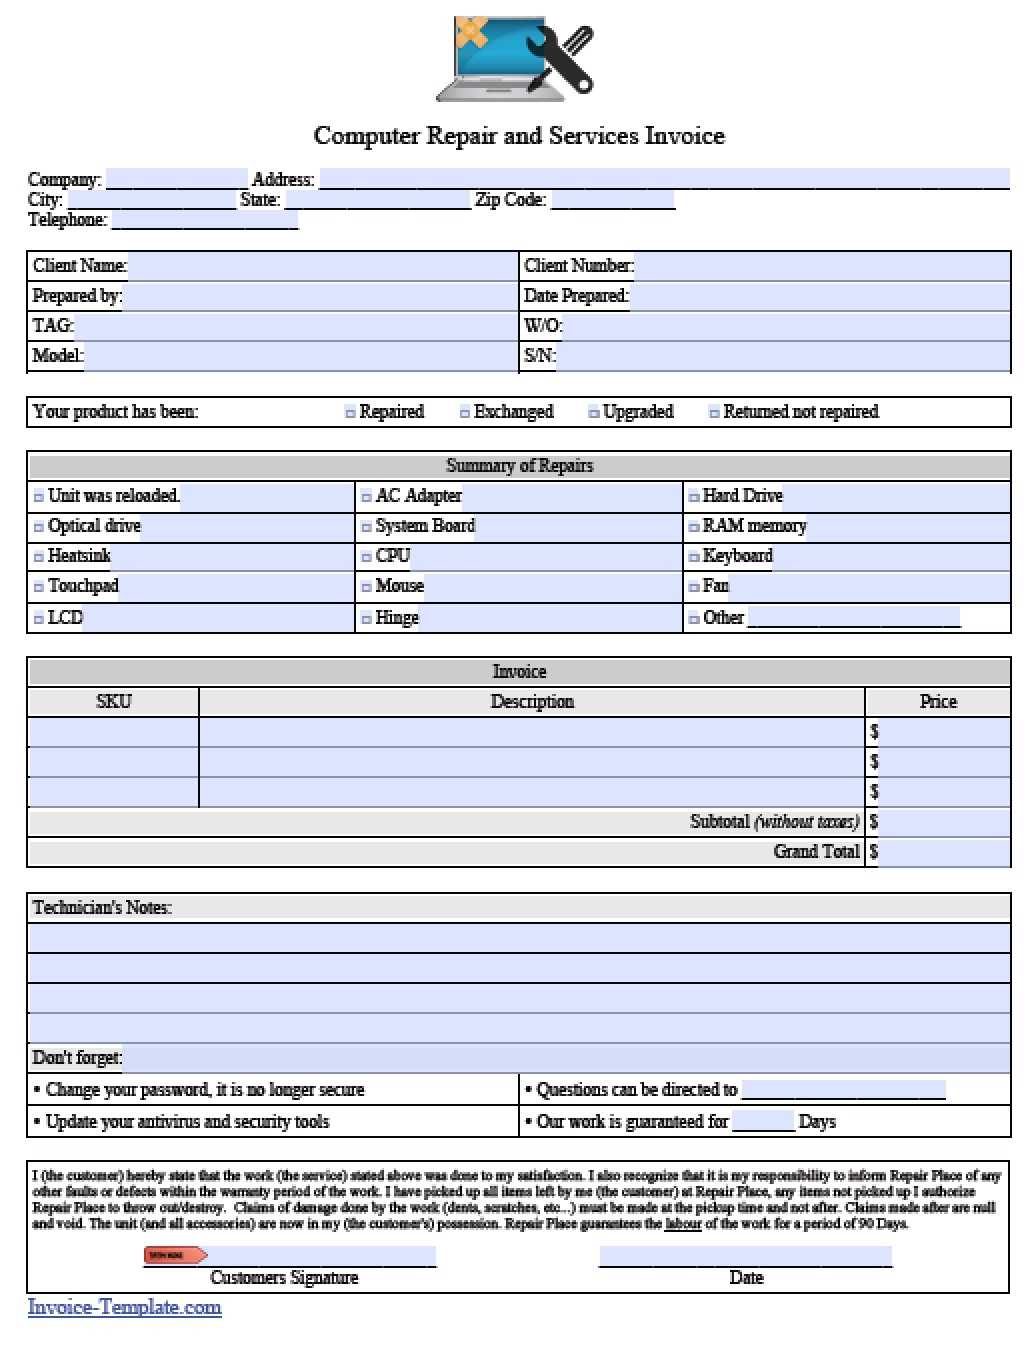 Free Computer Repair Service Invoice Template | Pdf | Word In Computer Maintenance Report Template